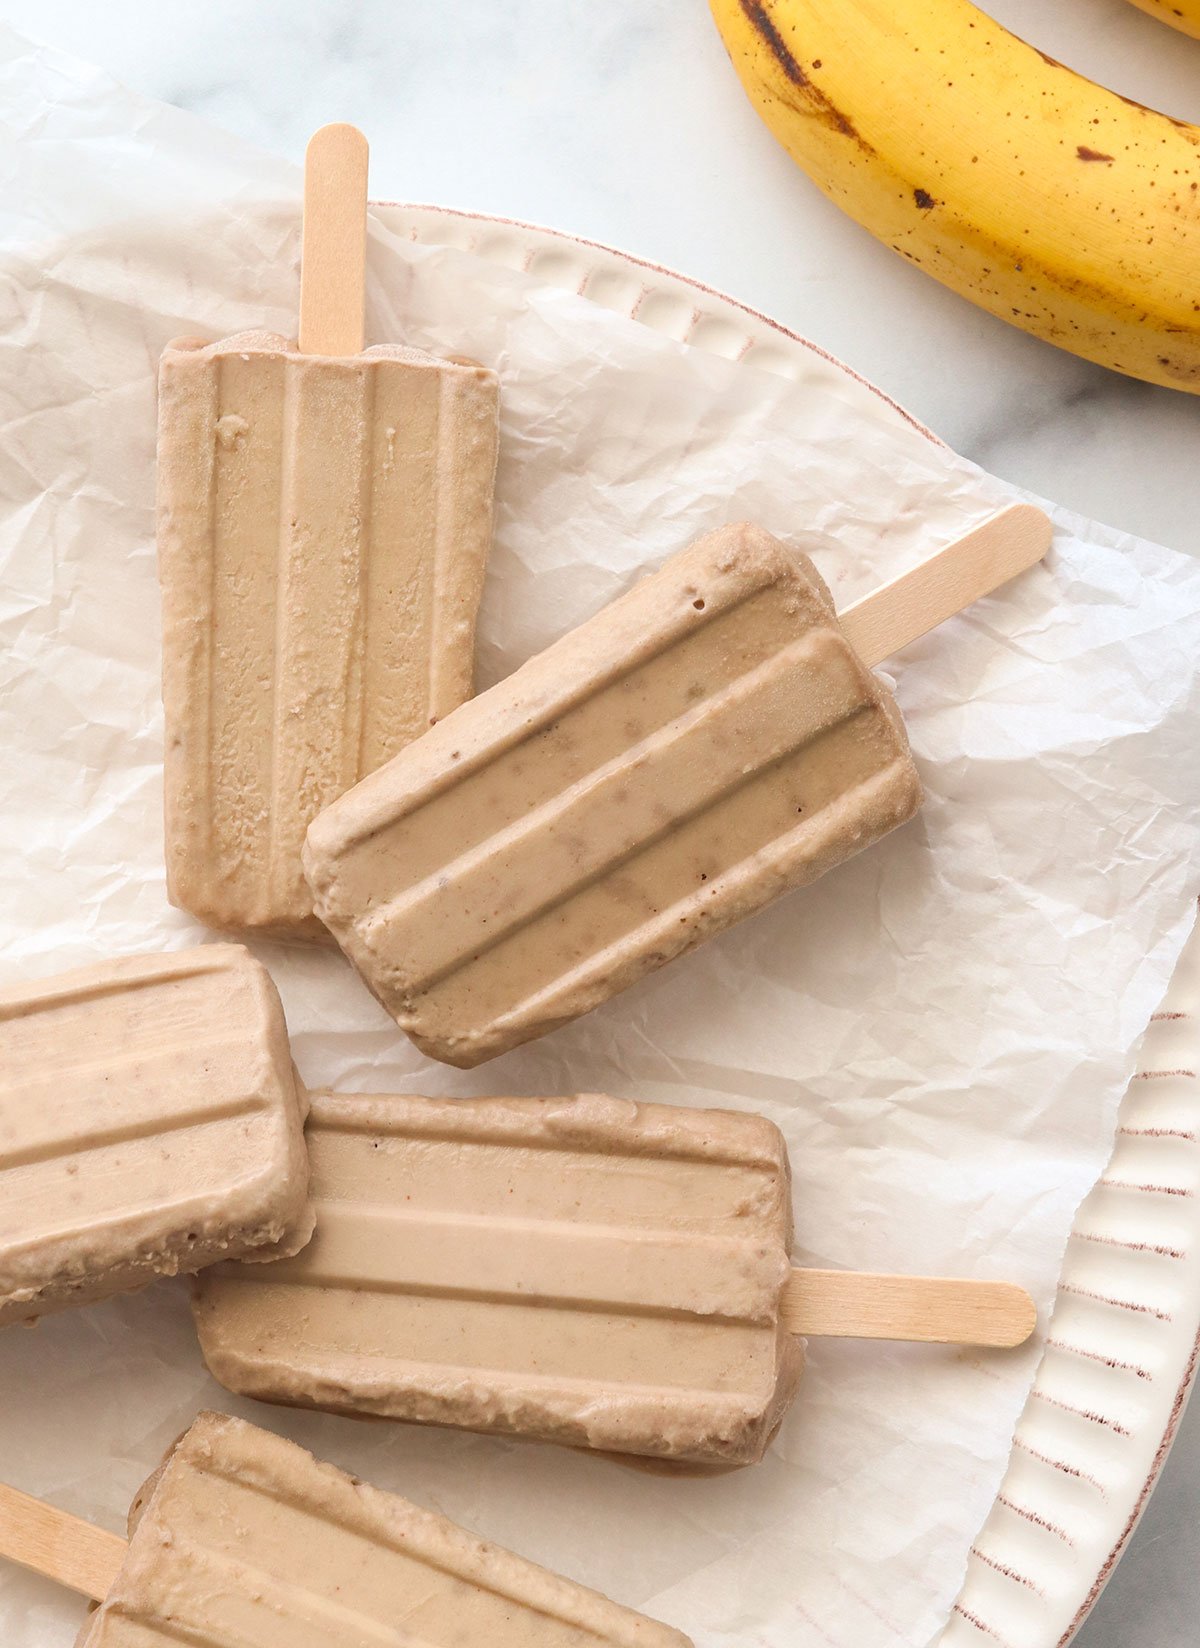 banana popsicles on a parchment lined plate.